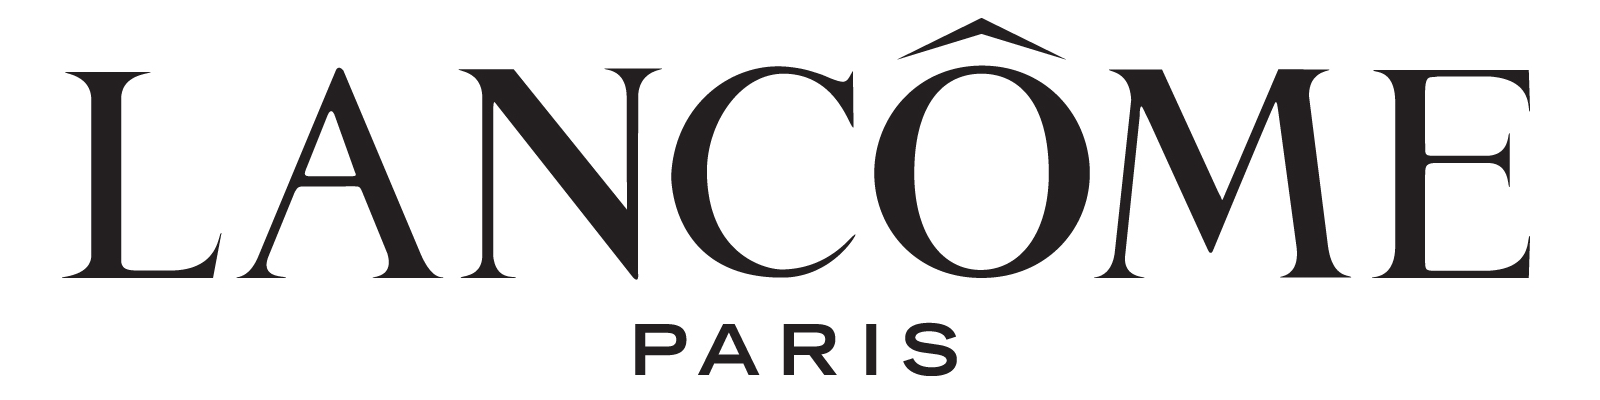 Lancome Coupons & Promo Codes